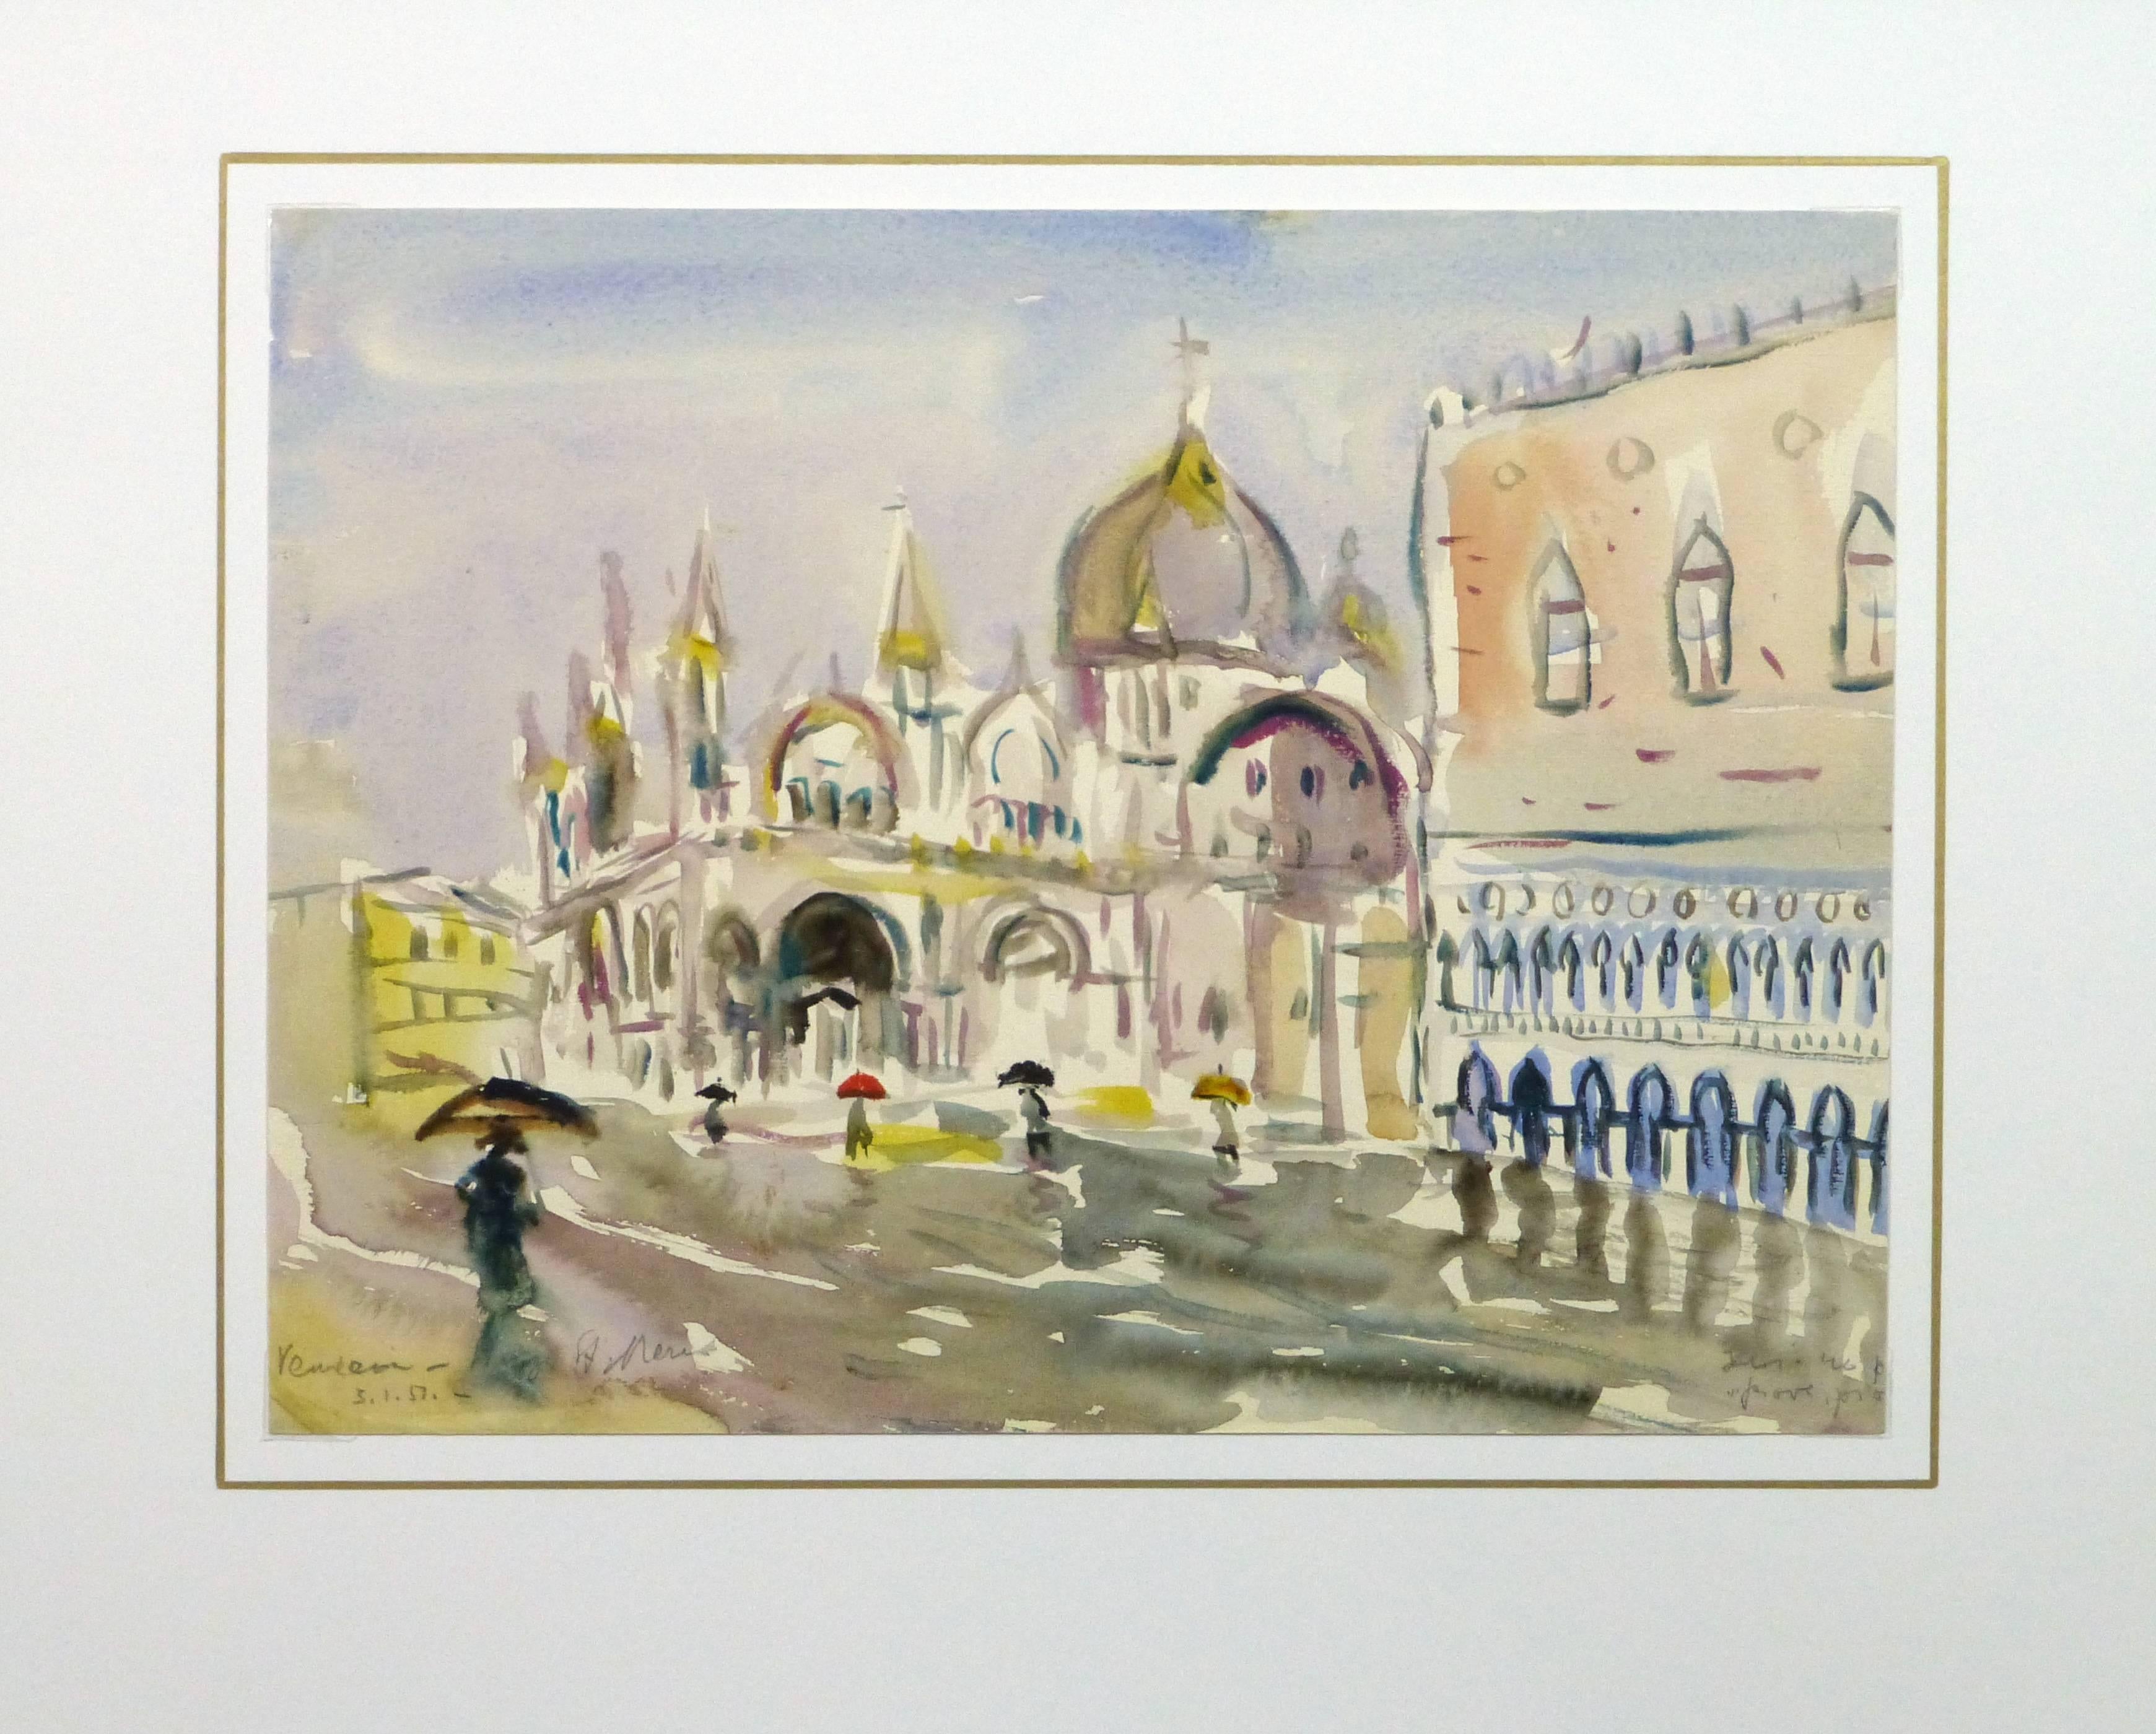 Delightful watercolor of a scene on the Piazza San Marco in Venice, Italy, 1951. Signed and dated lower left.

Original one-of-a-kind artwork on paper displayed on a white mat with a gold border. Mat fits a standard-size frame. Archival plastic